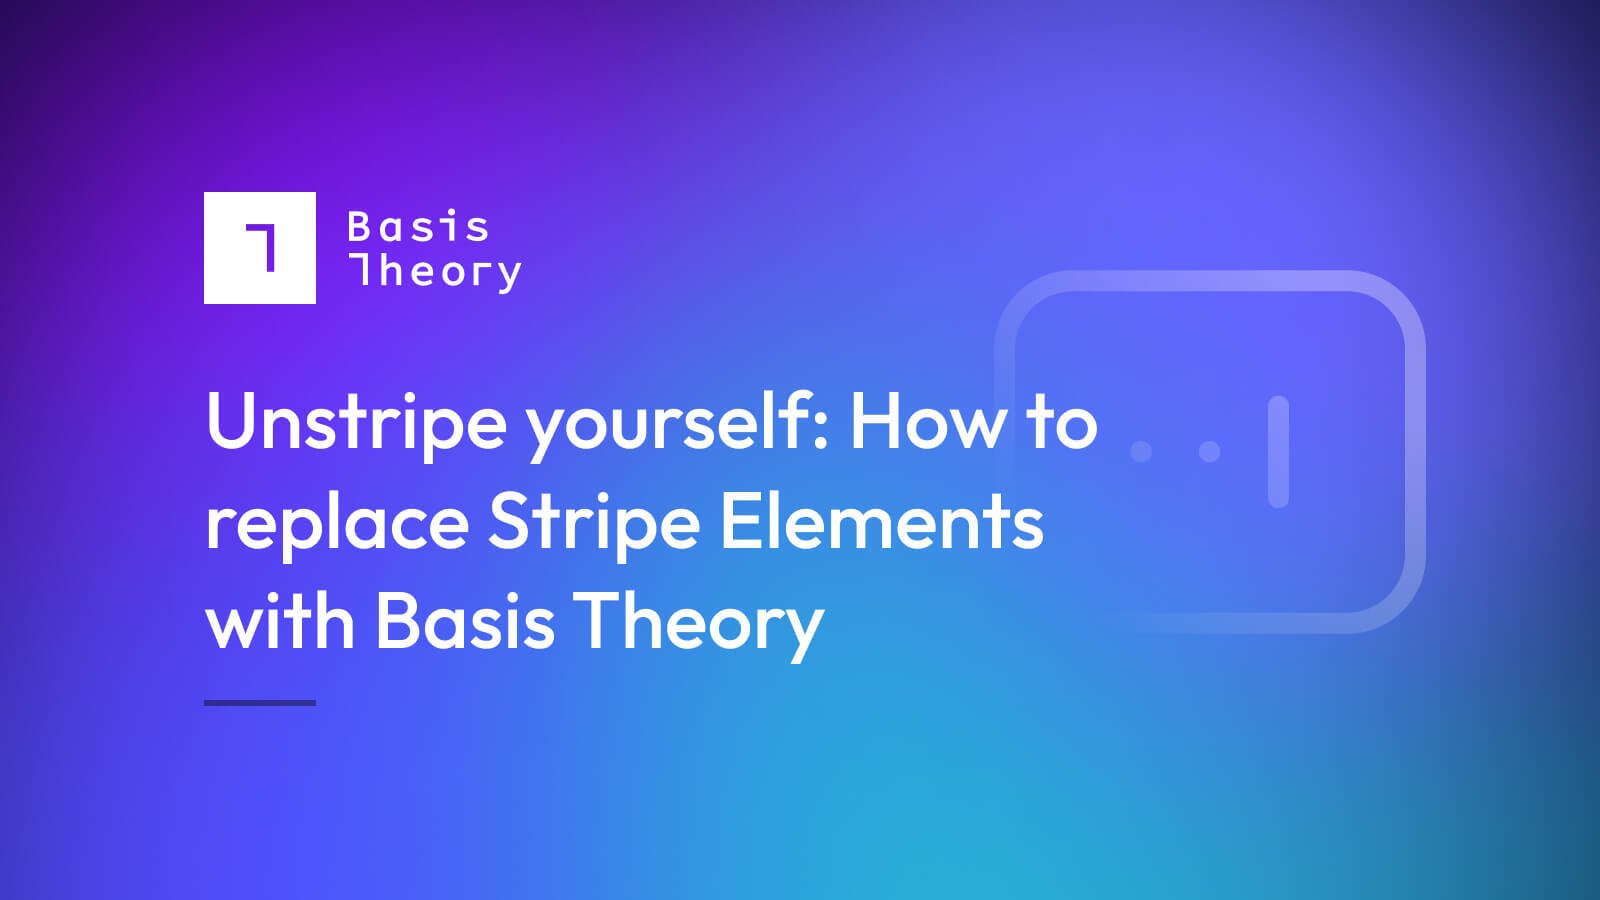 How to replace Stripe Elements with Basis Theory